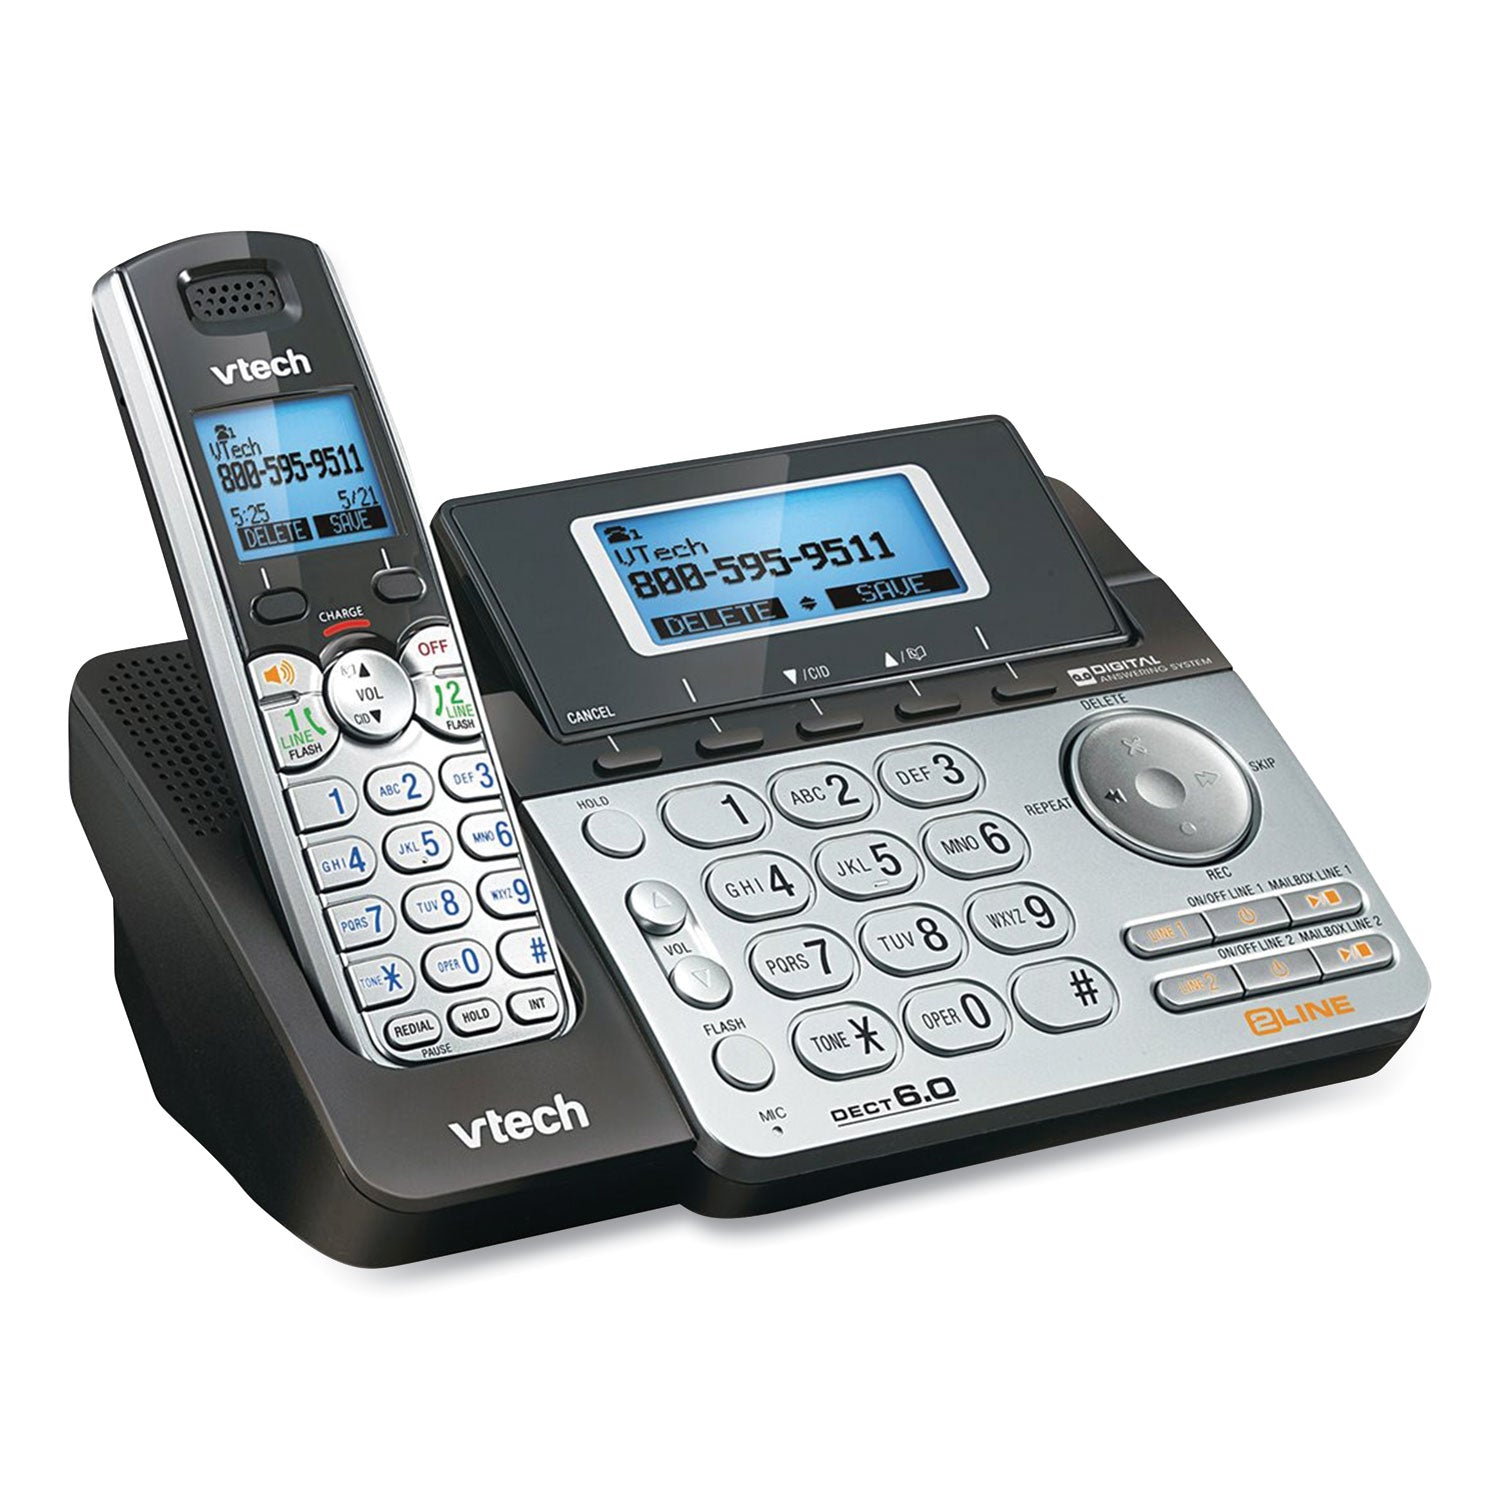 ds6151-2-two-handset-two-line-cordless-phone-with-answering-system-black-silver_vte80088300 - 3